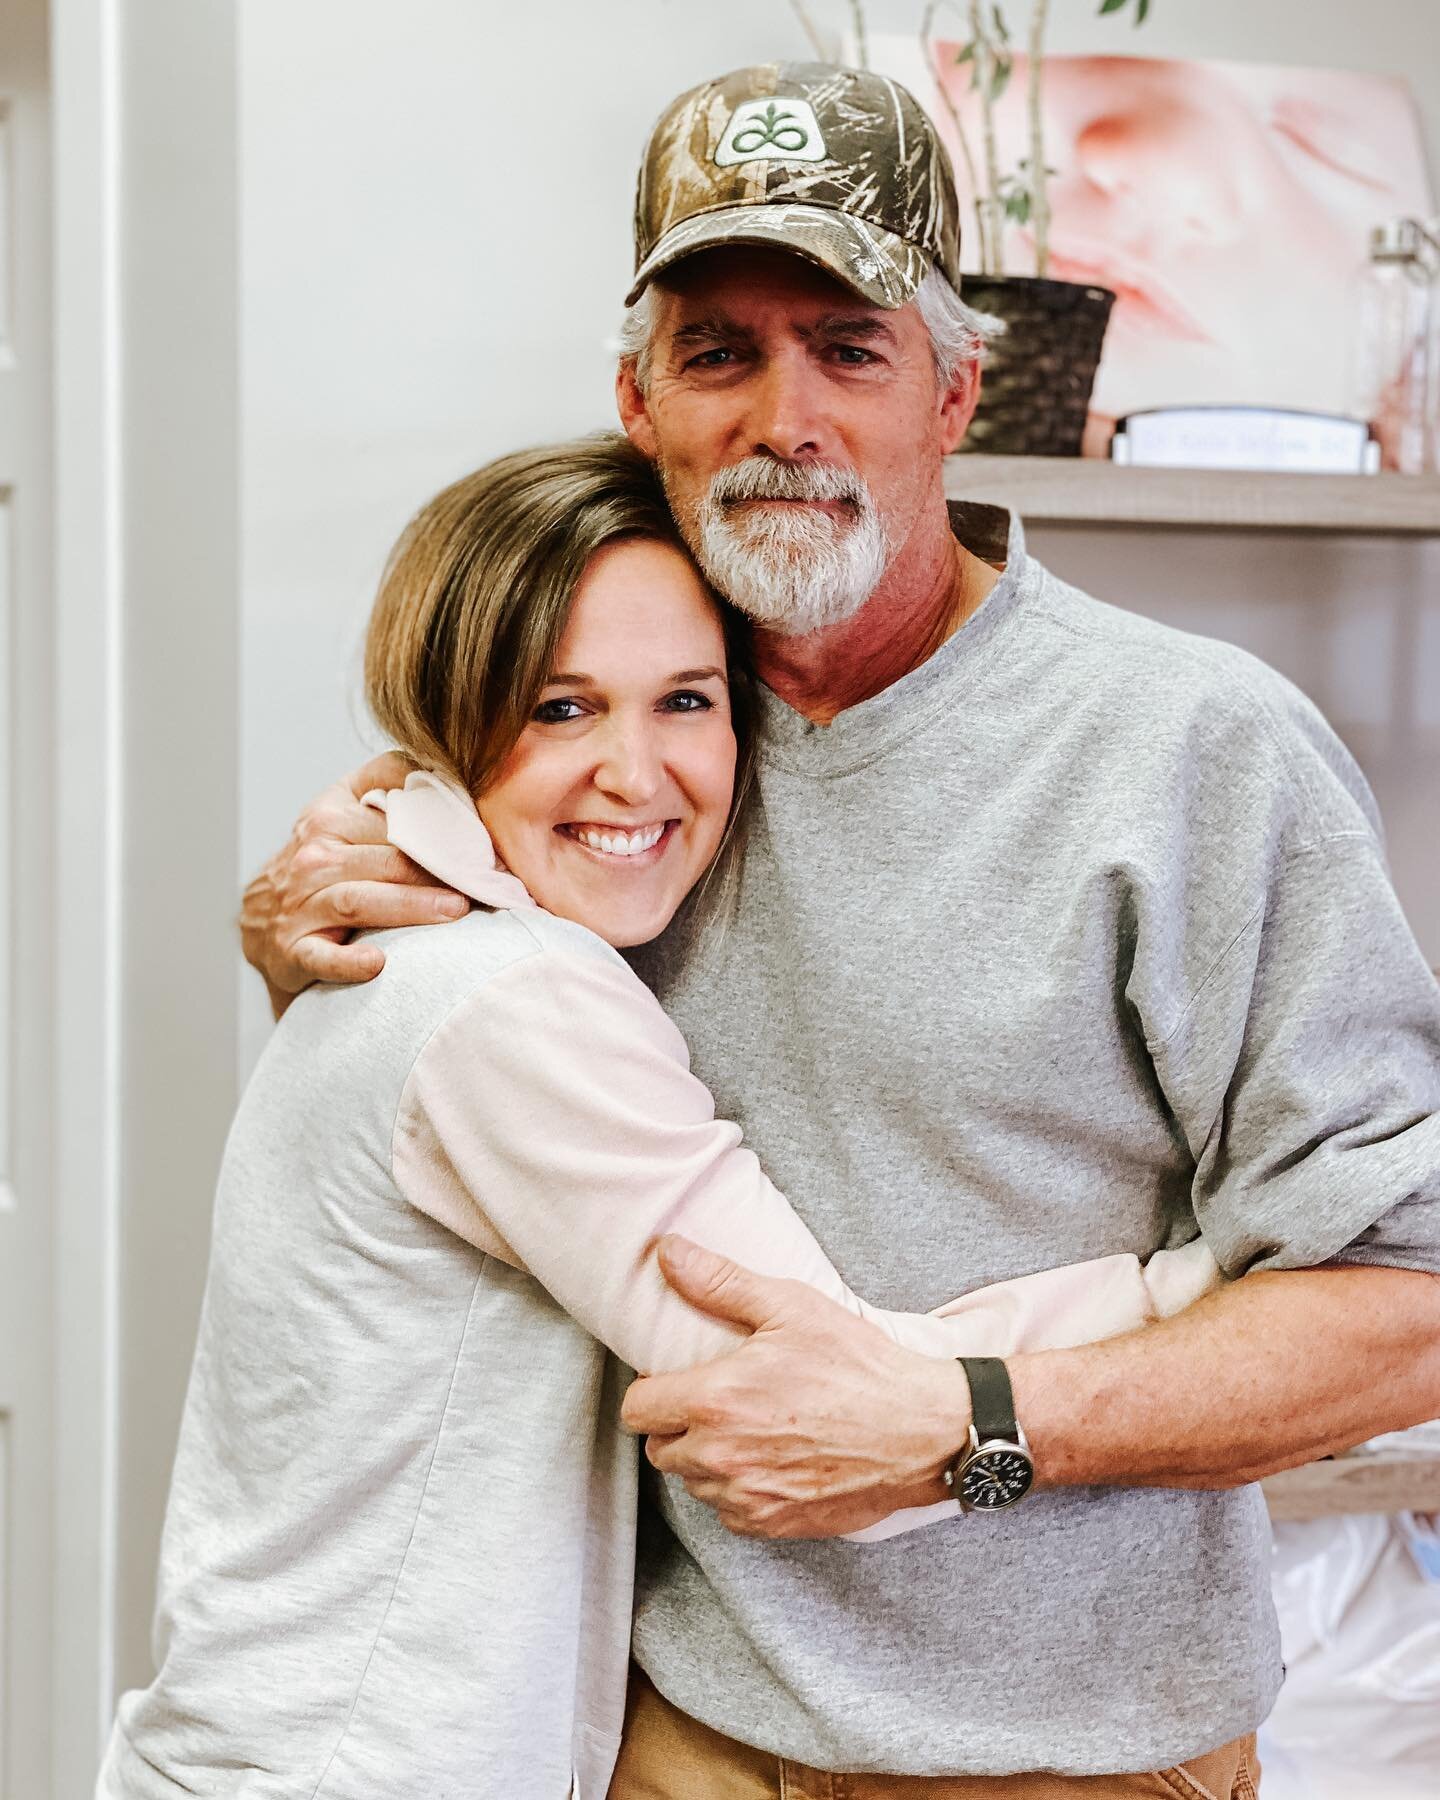 Most of the pictures we post make us smile, but this one...this one makes me smile and tear up at the same time. #happytears 

You can just feel the love between these two. 💕

Meet Dr. Katie&rsquo;s dad. 

He&rsquo;s the man who helped shape this be